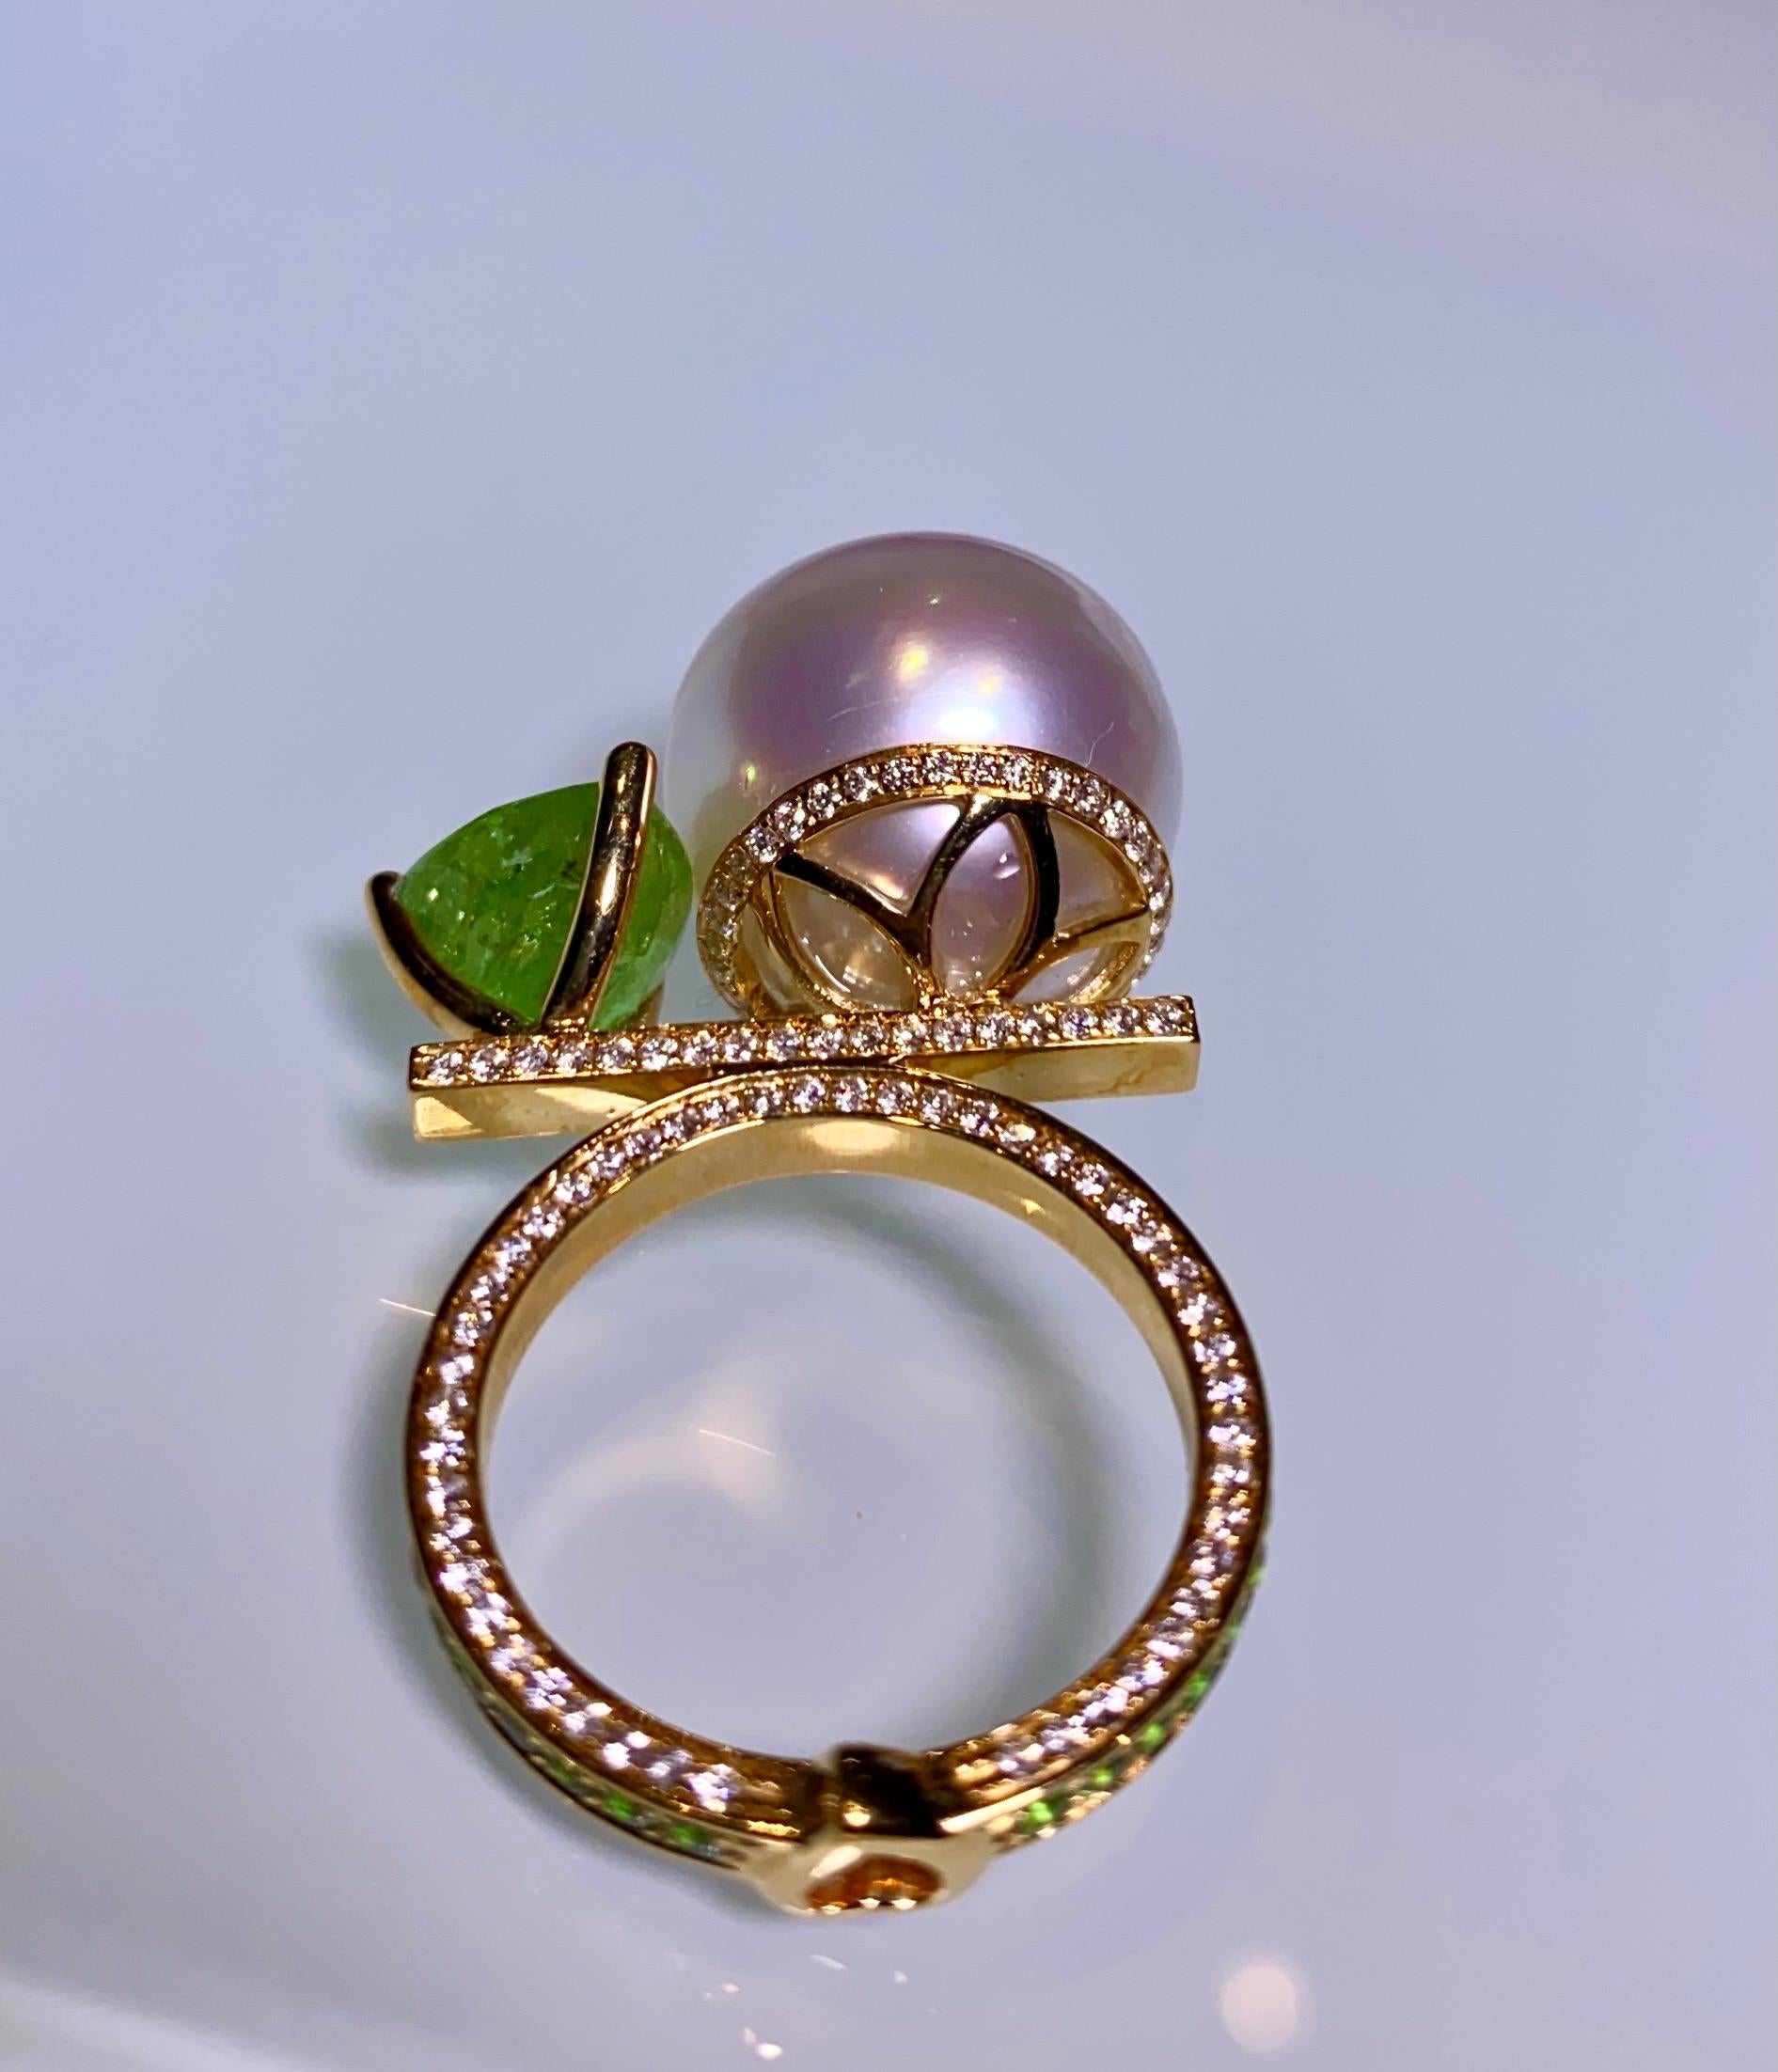 It is a very bold design with pearls and Tsavorite sitting at two ends of a scale. The surface of the ring is full of Diamonds and Tsavorite pave except for the claws. It is a big and unique cocktail ring and would suit those who love a big loud